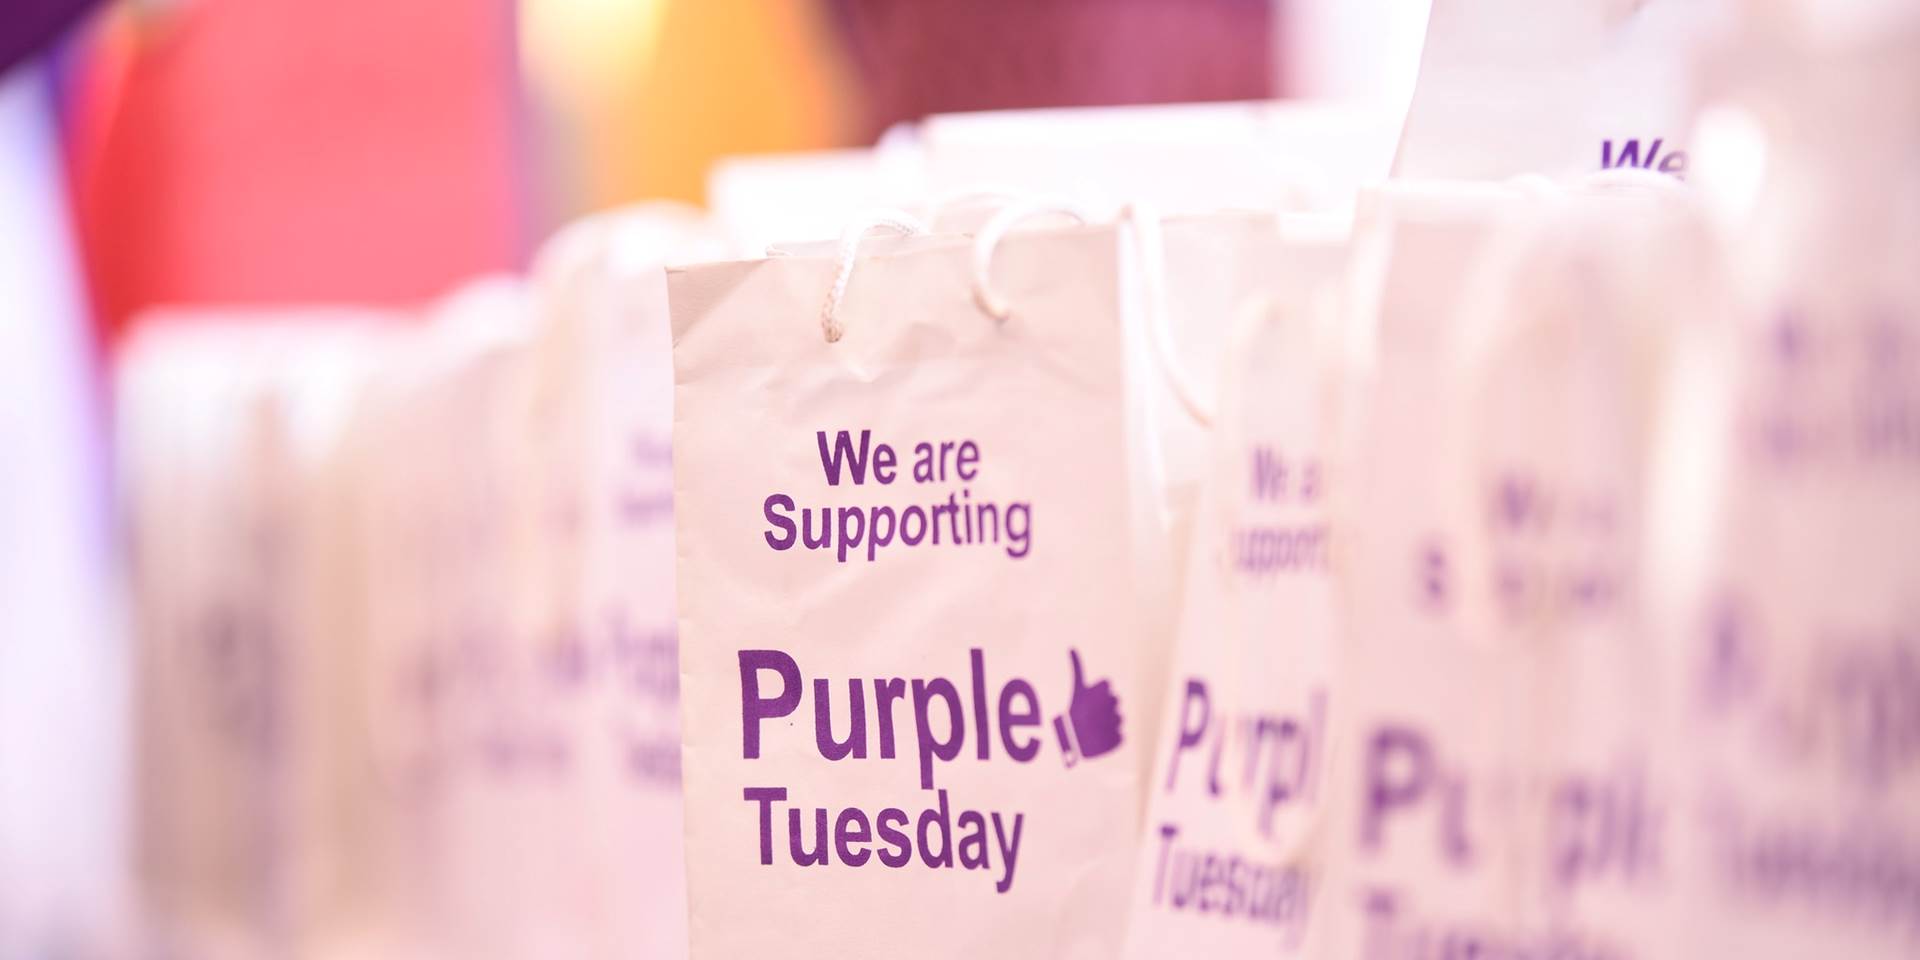 A picture of a bag with the Purple Tuesday logo on it